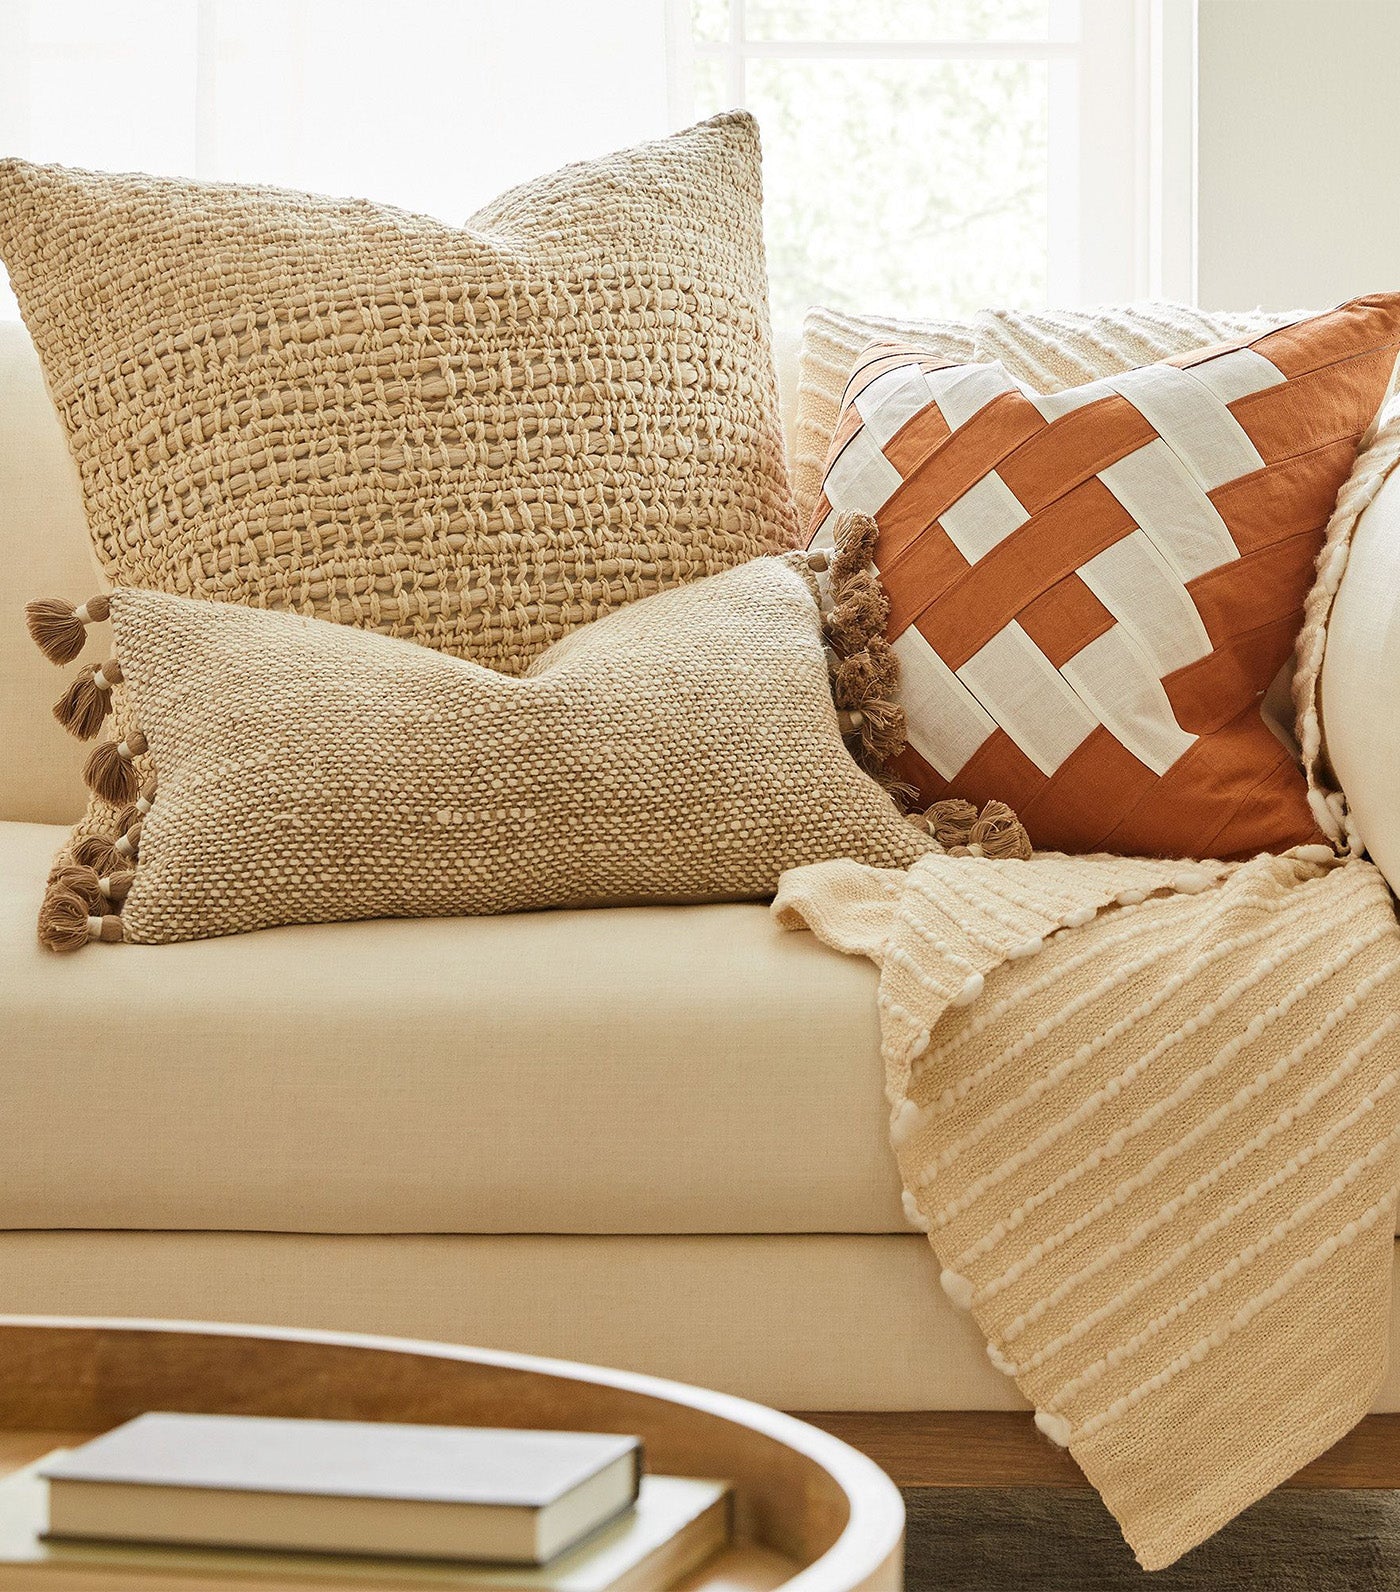 West Elm Pillows: Merging Luxury with Comfort in Home Décor插图3